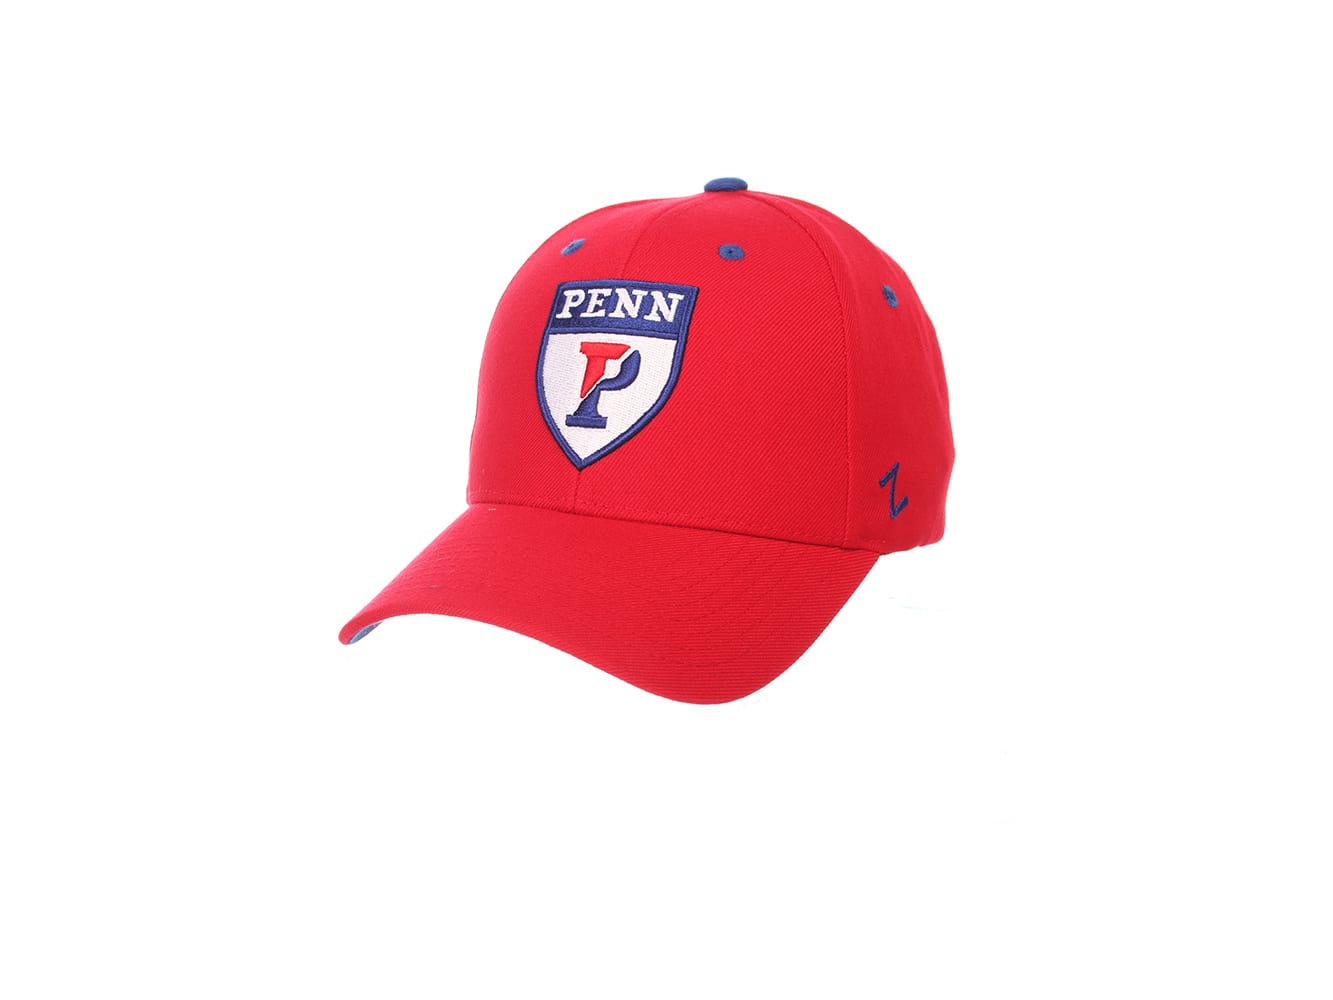 Penn Quakers Adult Game Bar Adjustable Hat - White